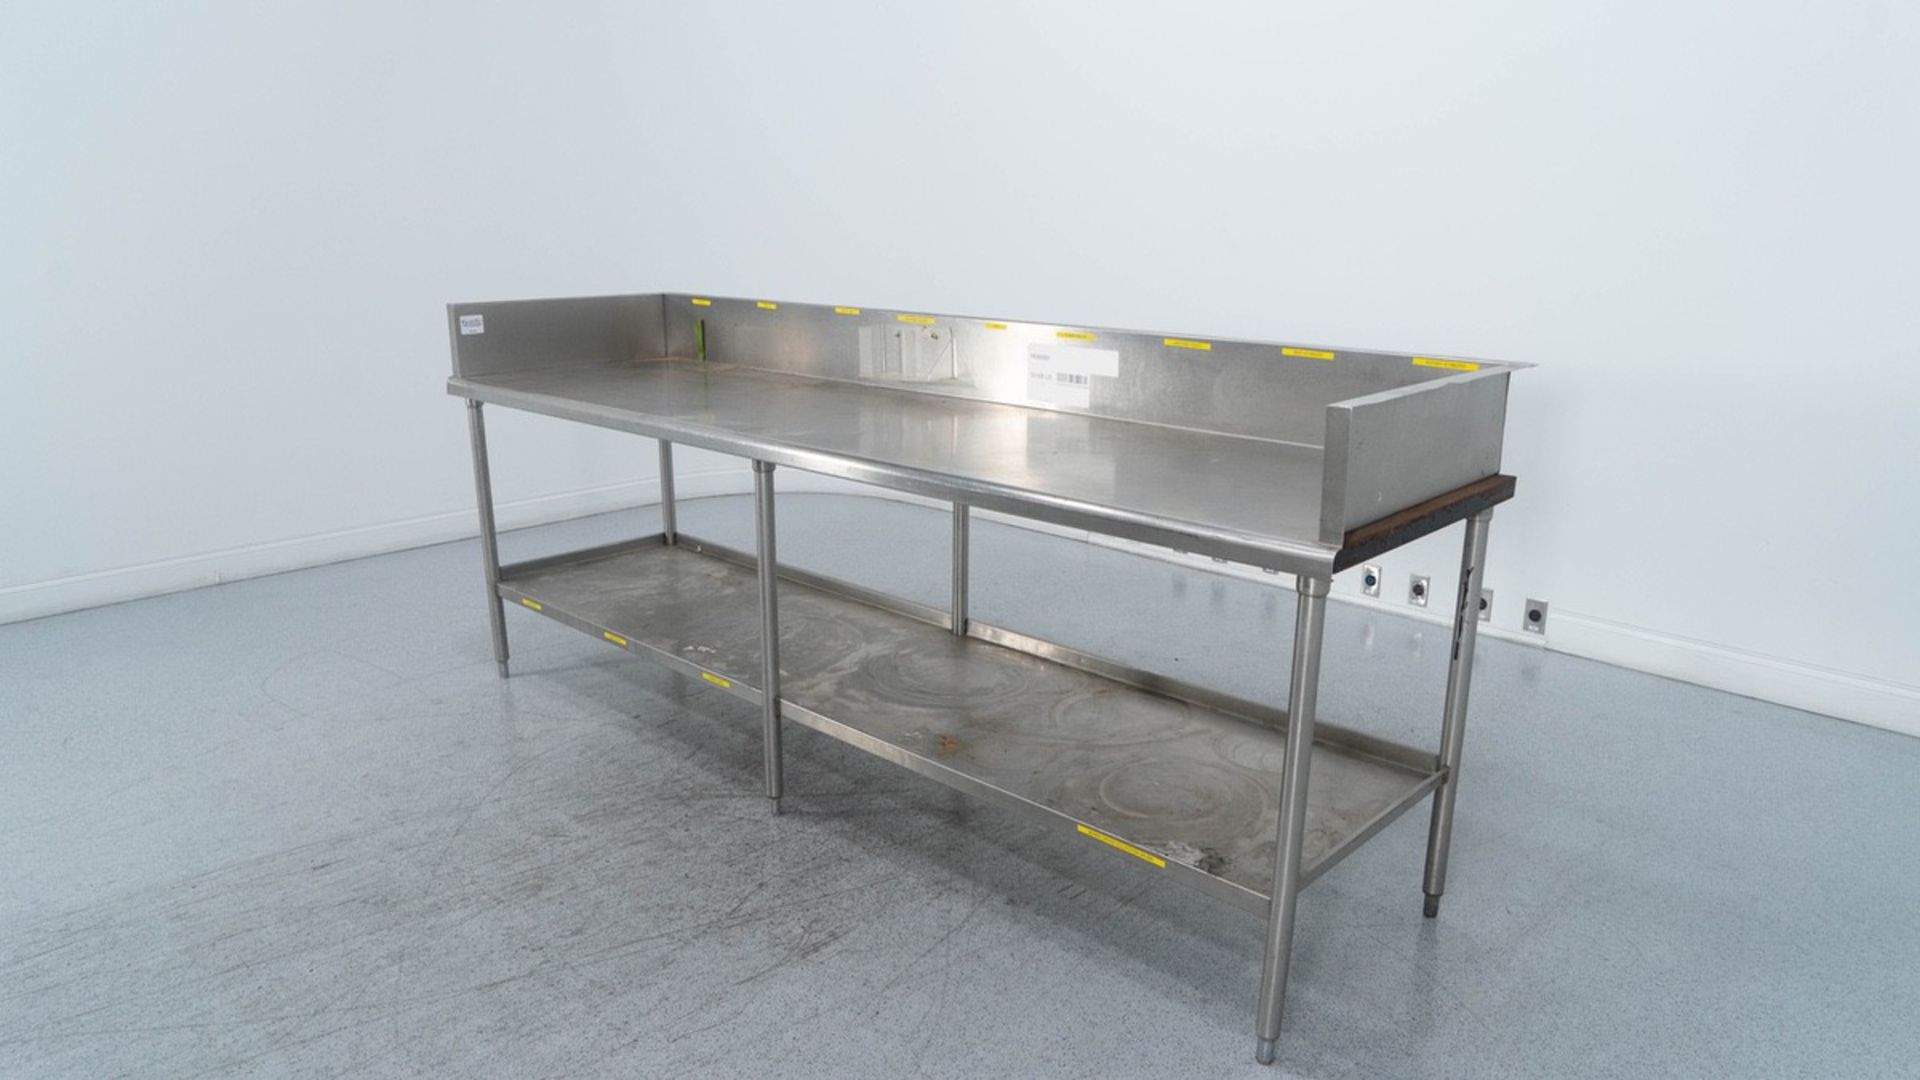 Stainless Steel 9' Stationary Table, (1) Stainless Steel 9' Stationary Table (PC 32 | Rig Fee: $10 - Image 3 of 3